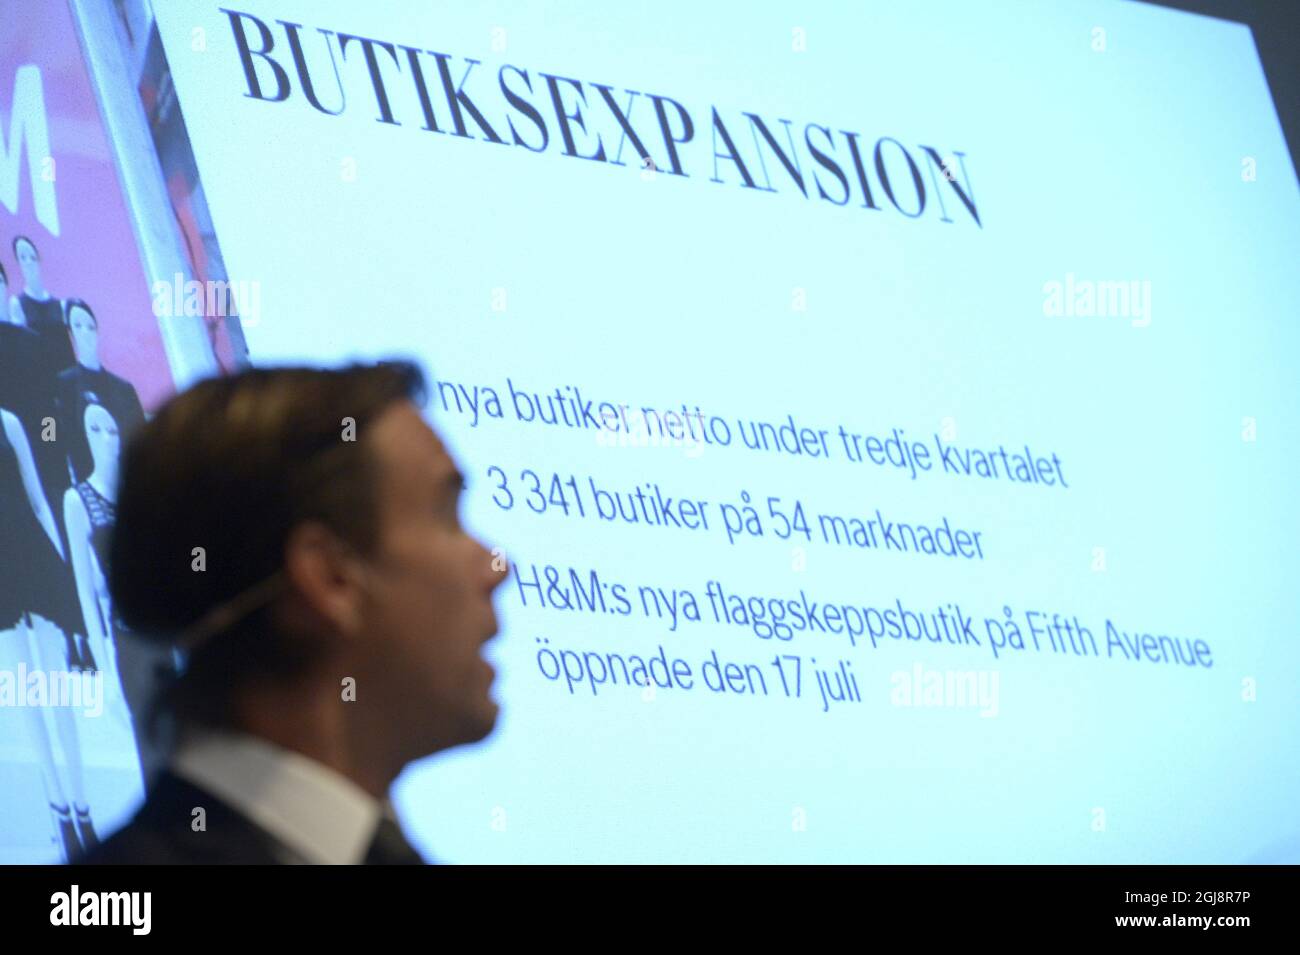 STOCKHOLM 20140925 Karl-Johan Persson CEO of H&M is seen during his  presentation of the companyÂ's third quarter financial report during a  press conference at the H&M head office in Stockholm, Sweden, September